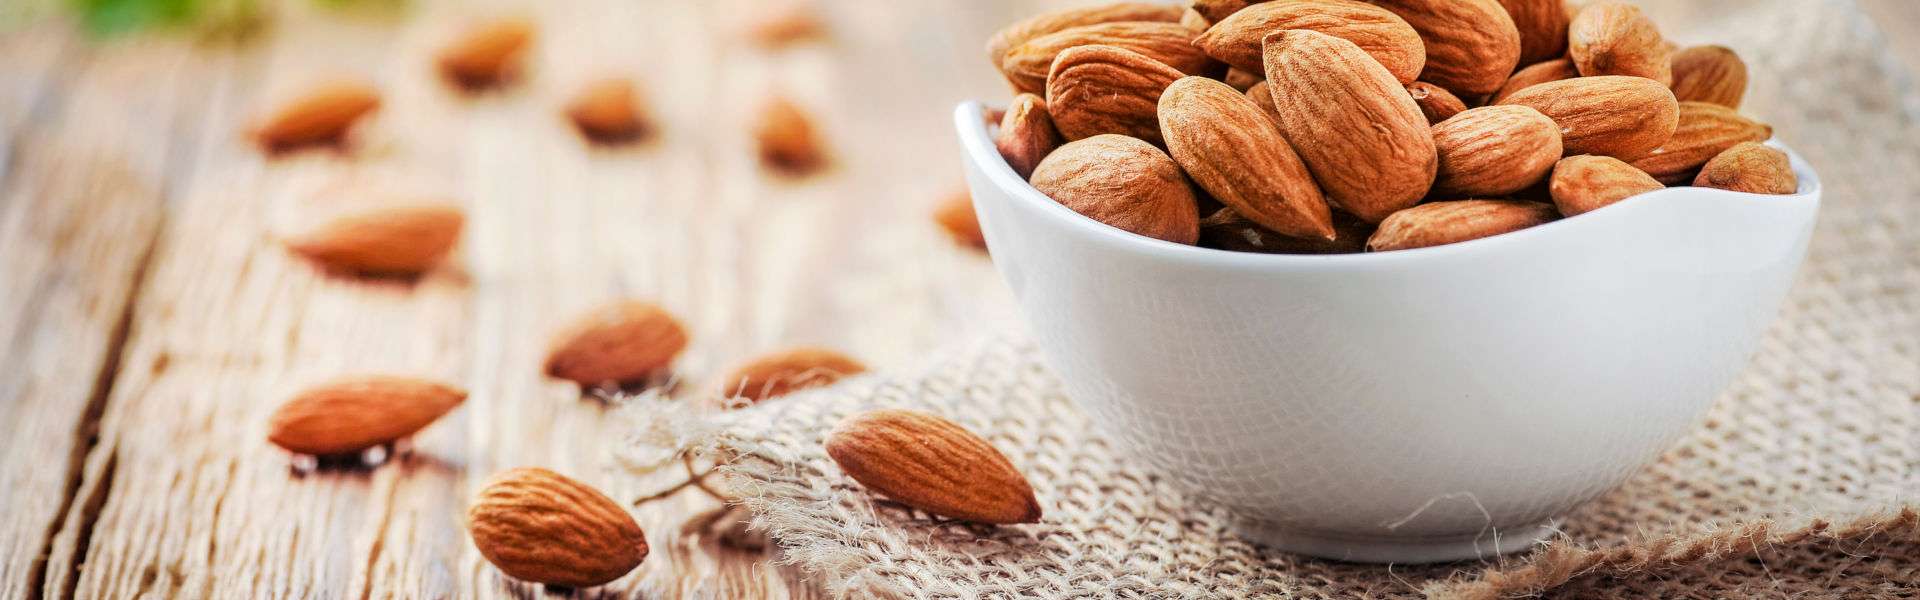 Almonds: why are they so good?